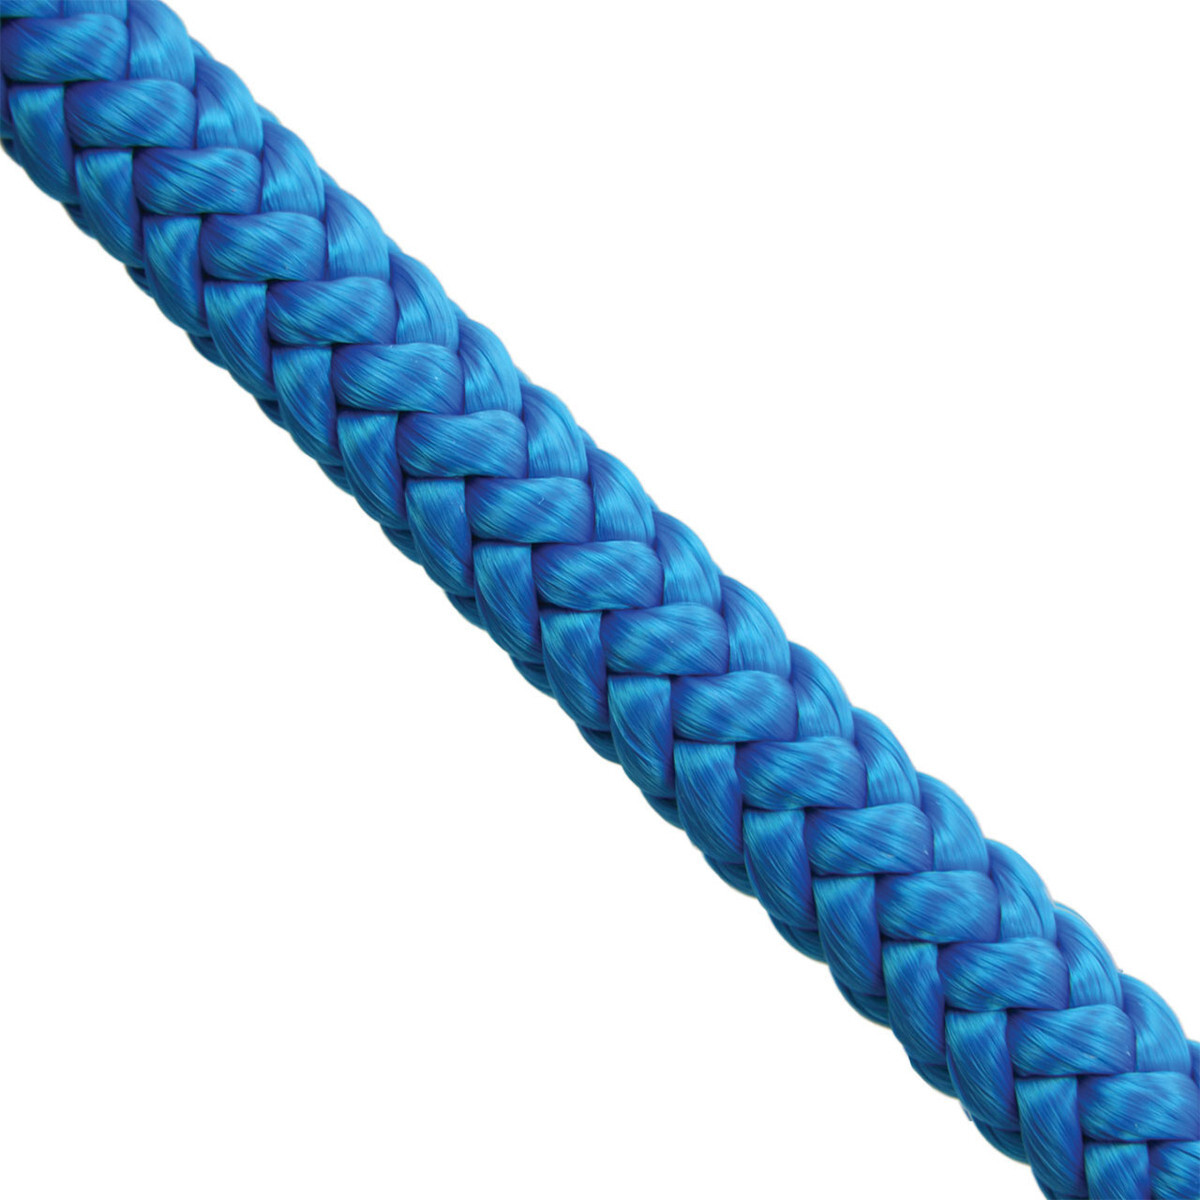 Samson Rope ropes - Lowest prices, free shipping